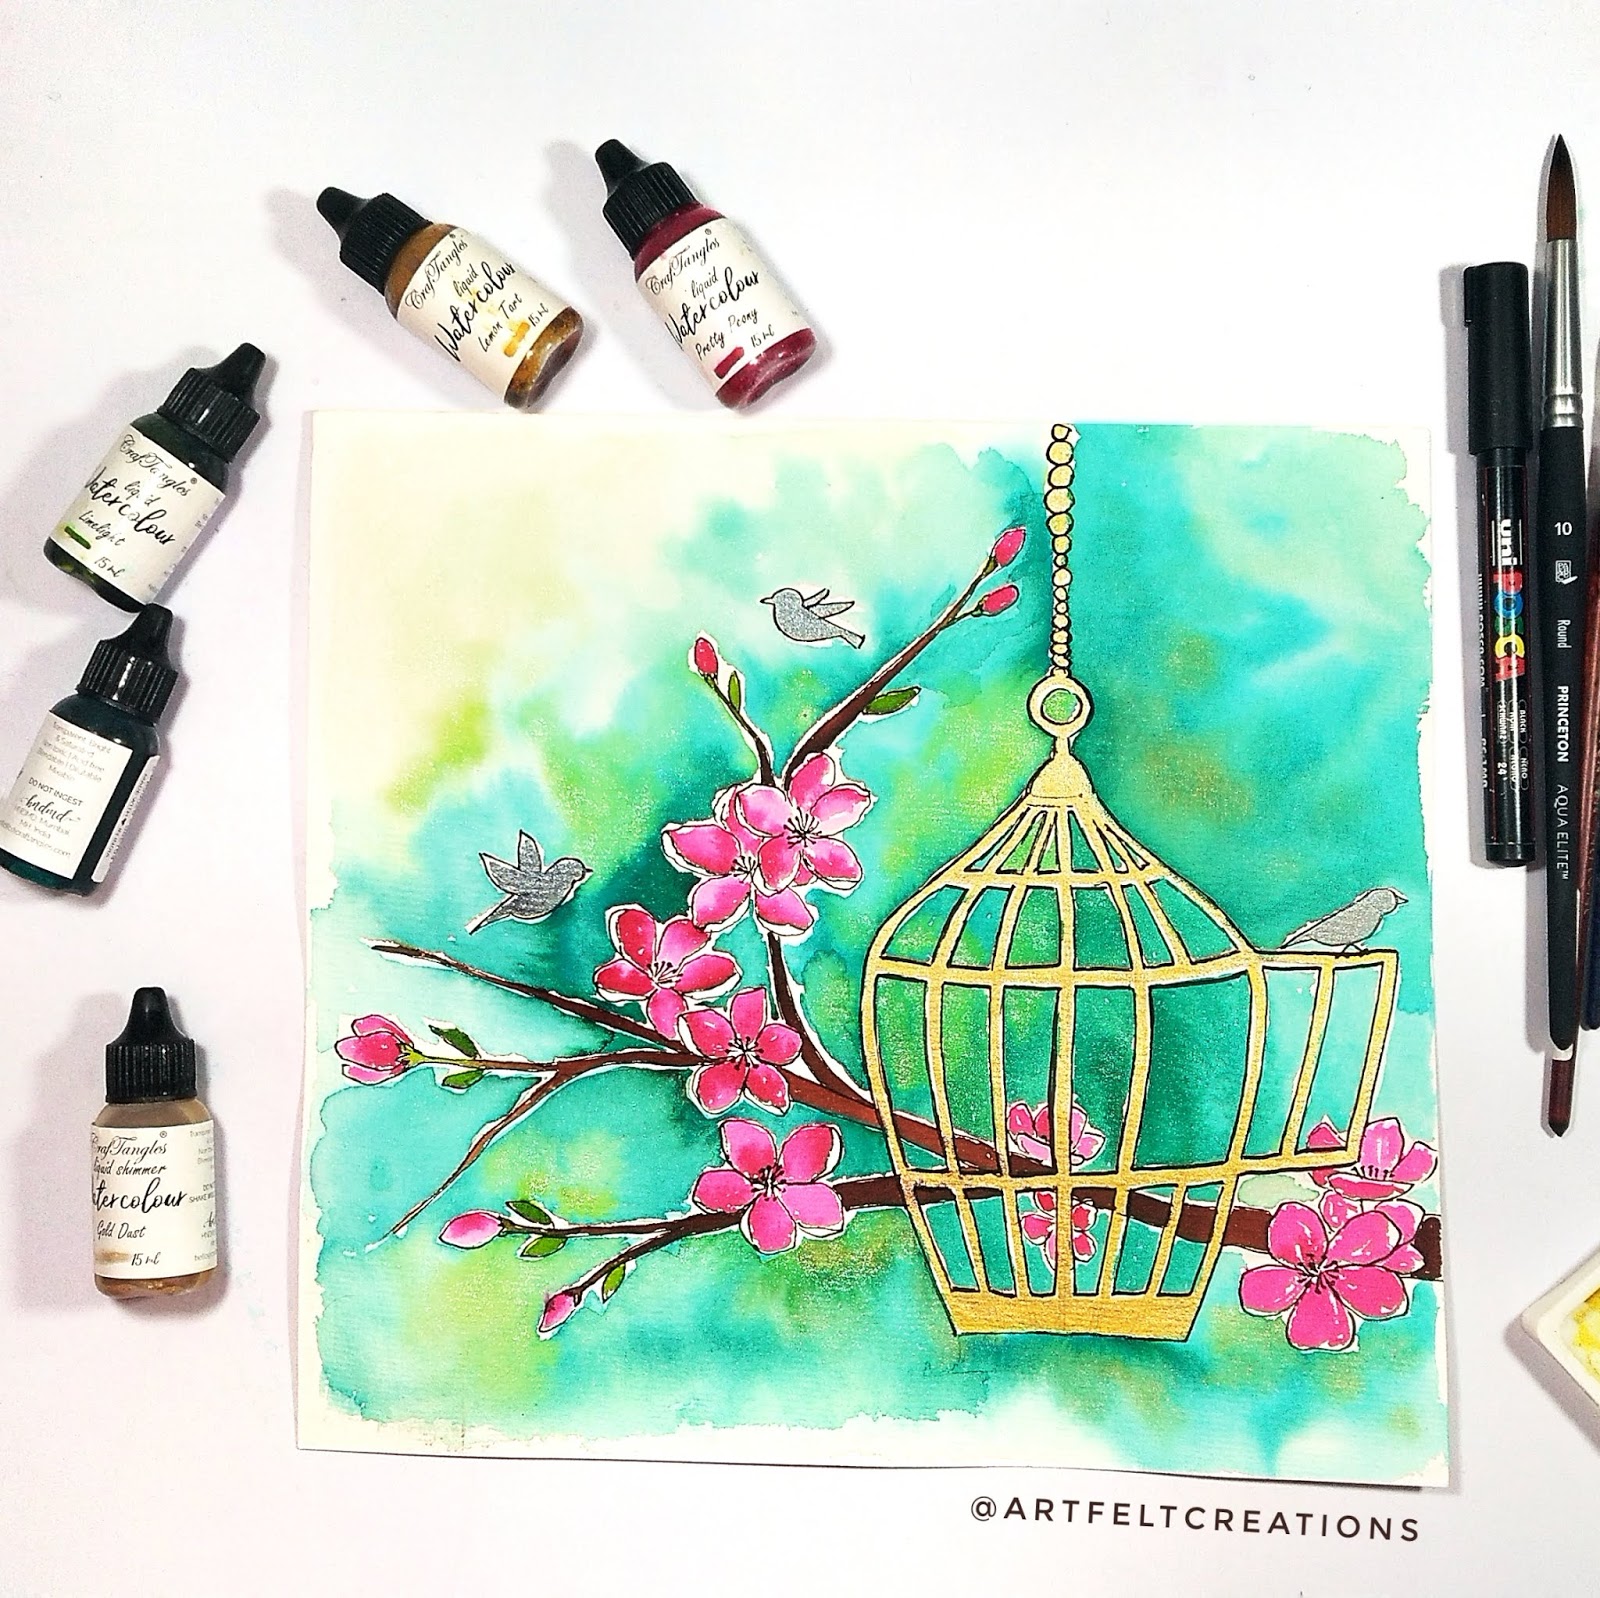 How to mix watercolour with ink - Artists & Illustrators